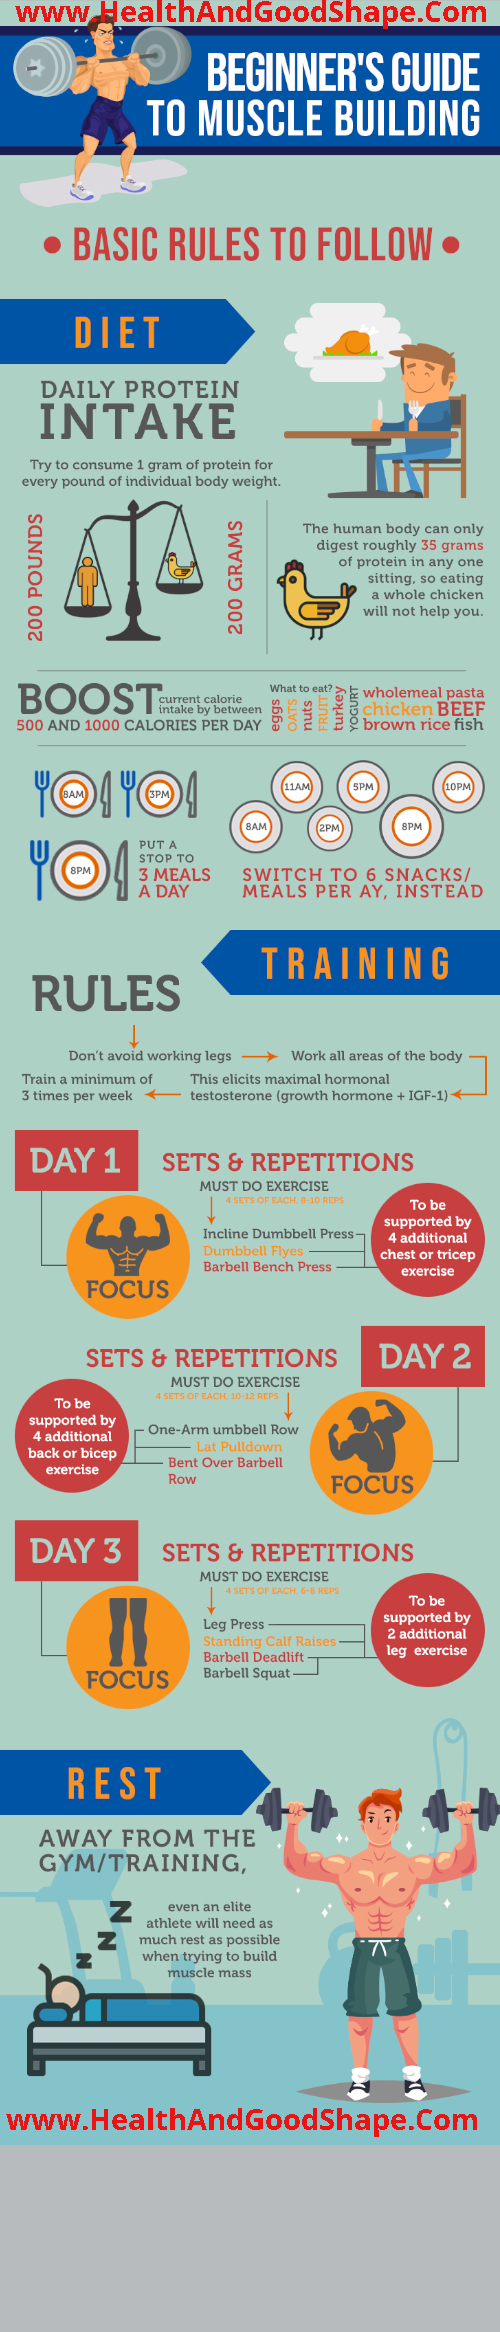 Muscle Building_1 infographic